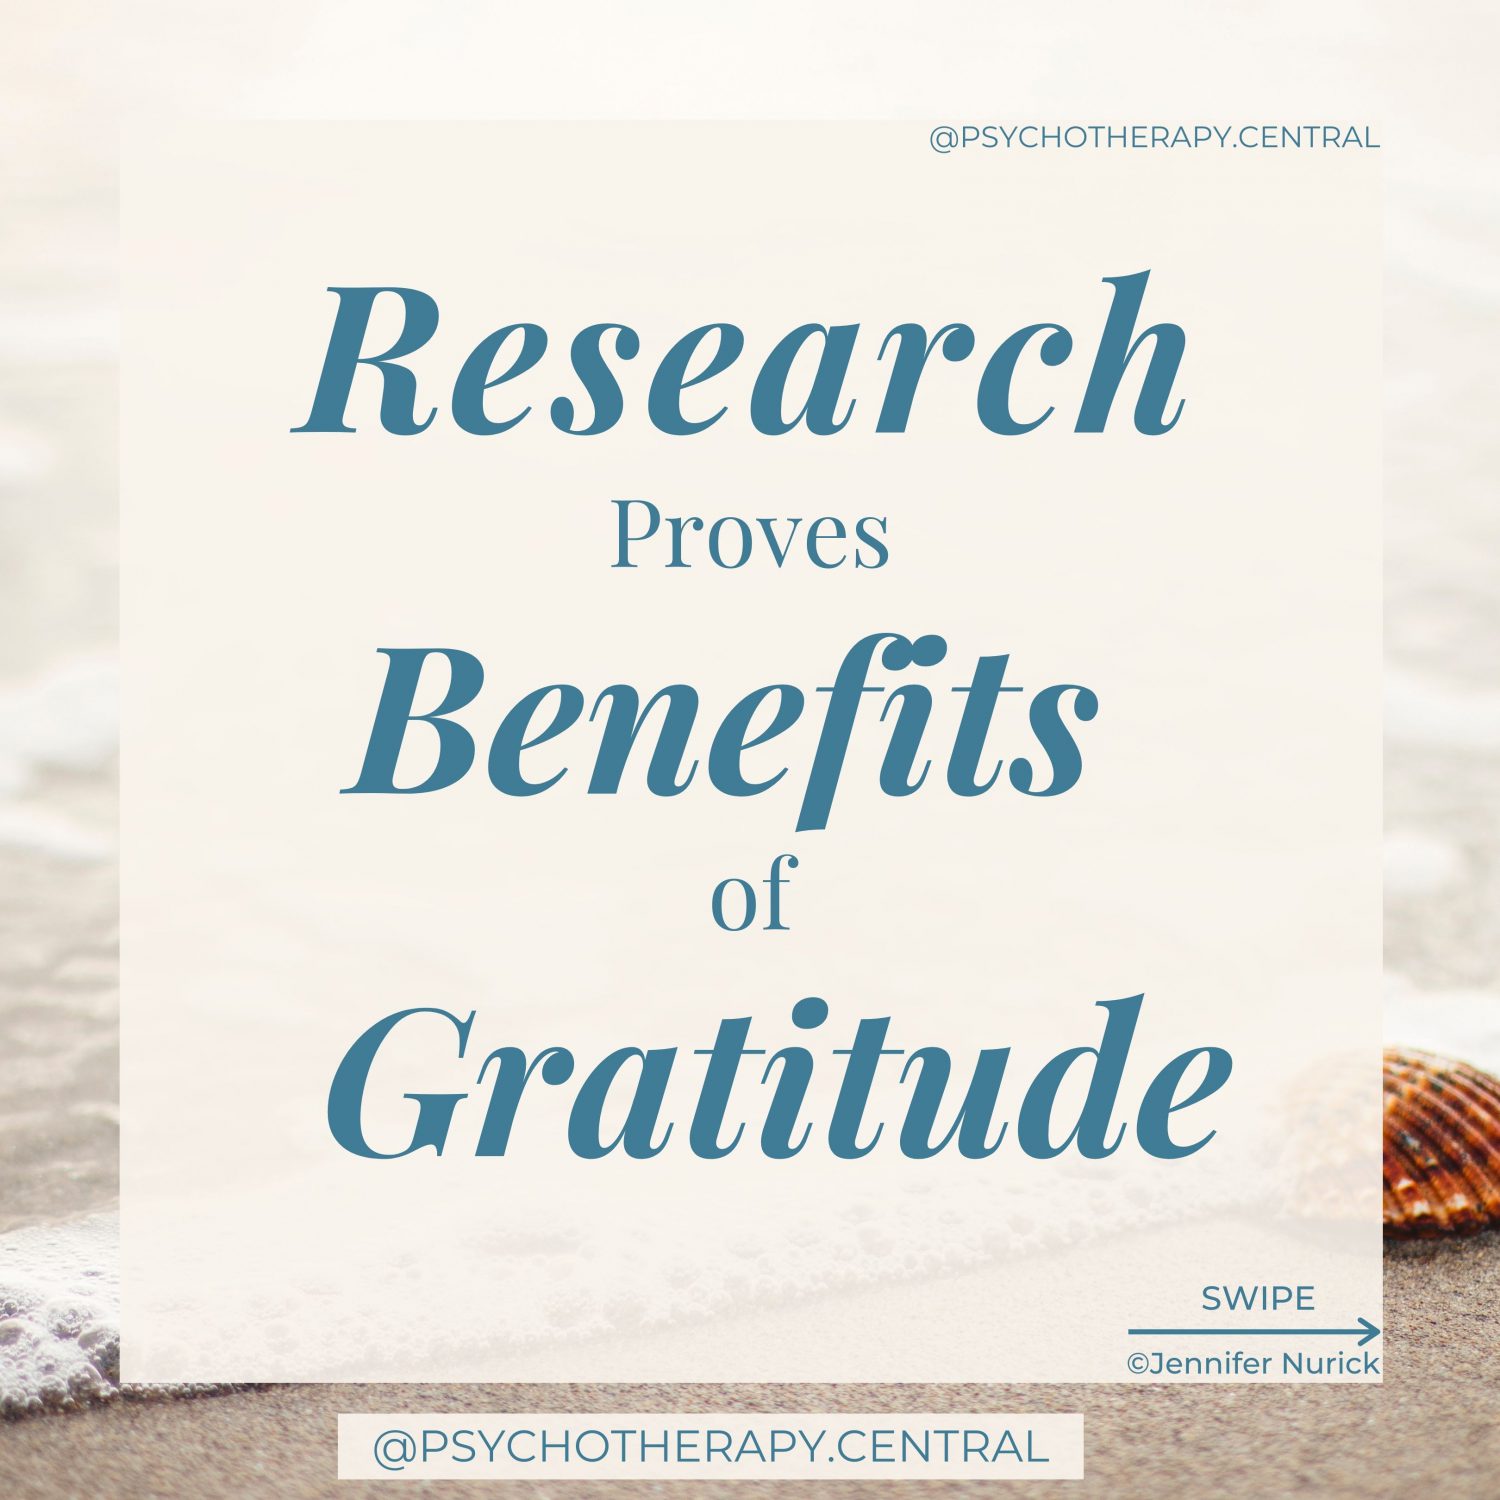 Research Proves Benefits of Gratitude Improved relationships (Algoe, Haidt, & Gable, 2008) Increased life satisfaction (Froh, Safick, & Emmons, 2008) Improves psychological health and happiness (Emmons & Shelton, 2002) Improved sleep – Journaling Increased mental fortitude – reduced stress Increased physical health Improved self-esteem Reduced tendency to compare self to others